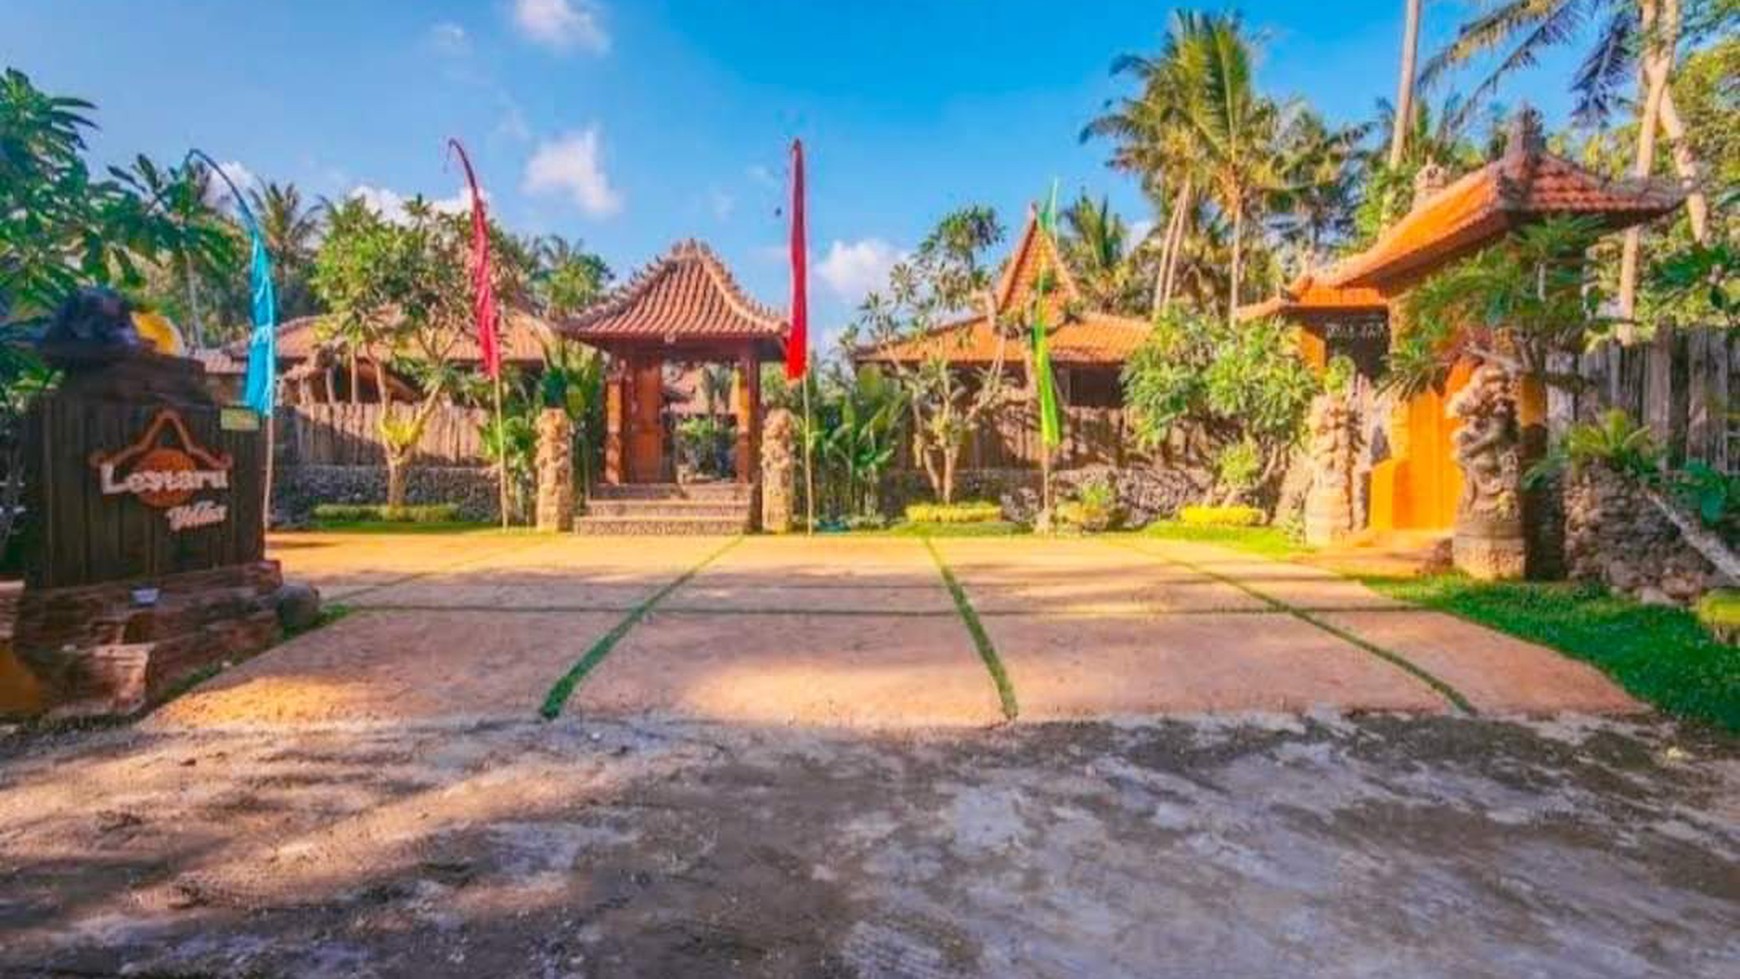 Beautiful 3 Bedroom Boutique Hotel  For Rent on 972sqm of Freehold Land 13 Minutes from Ubud Center